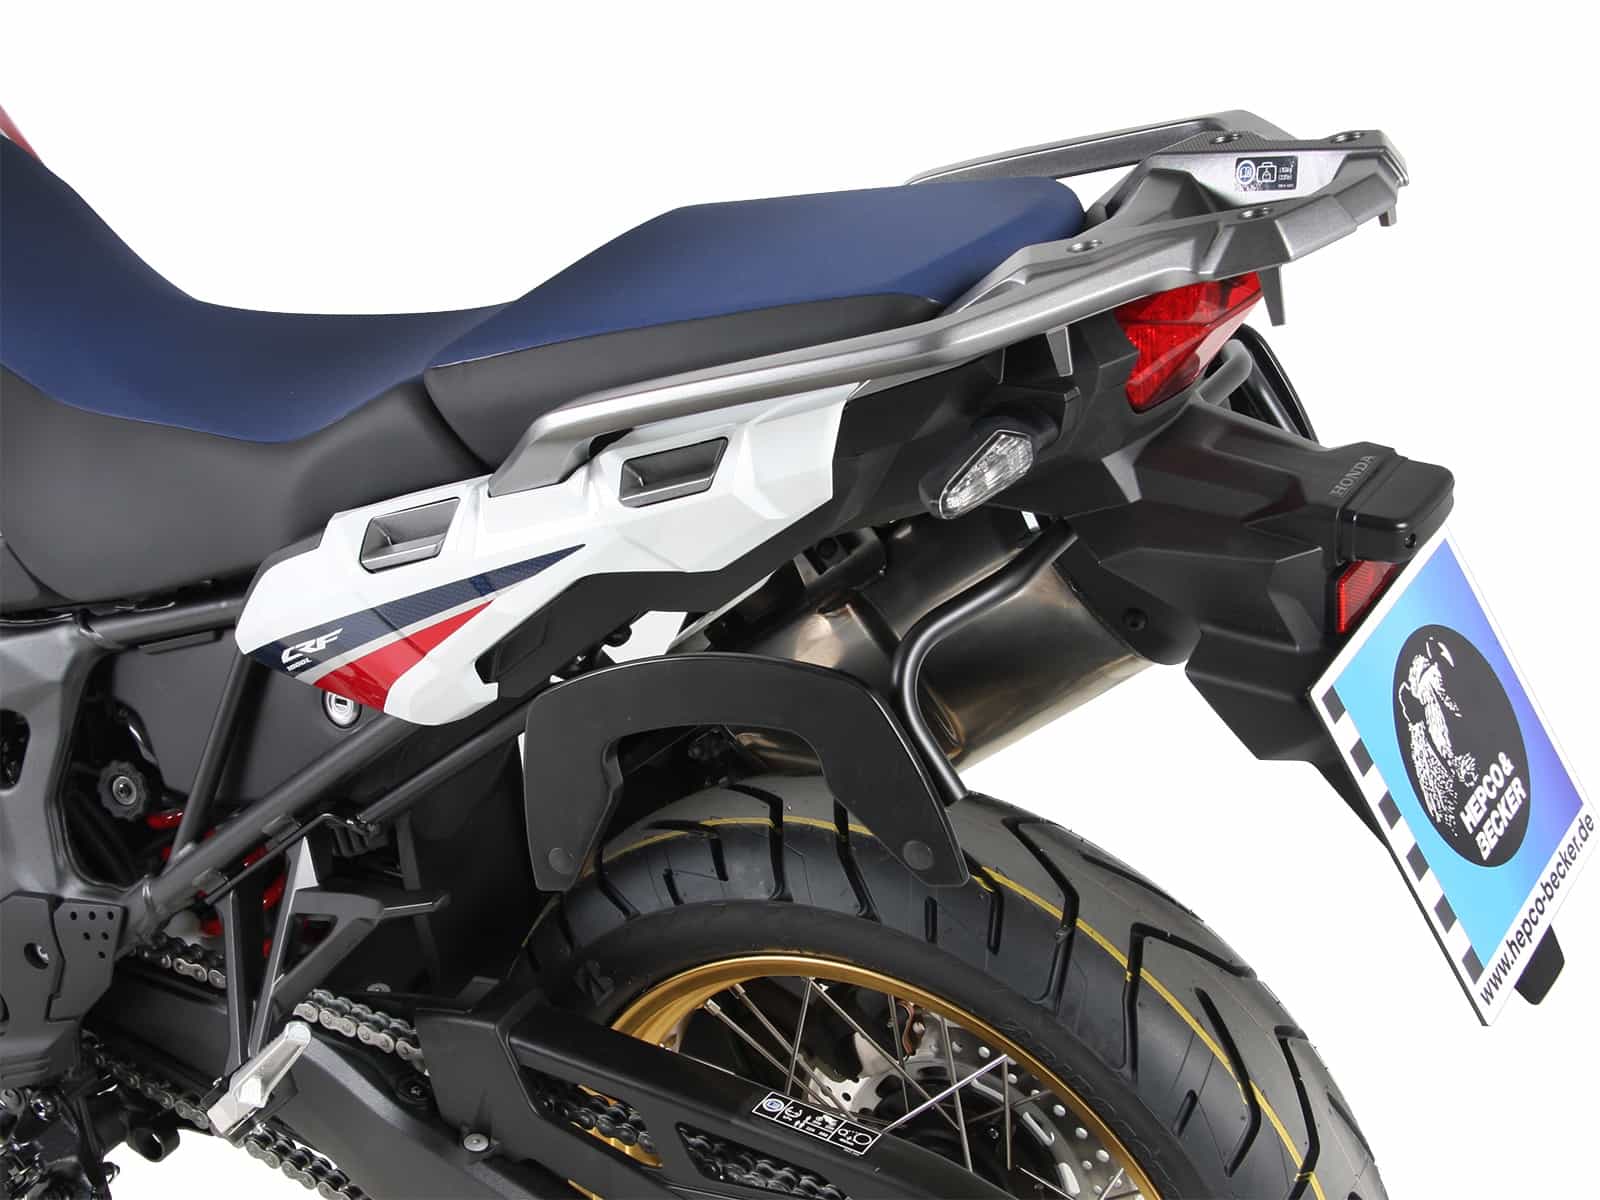 C-Bow sidecarrier black for Honda CRF1000L Africa Twin Adventure Sports (2018-2019)